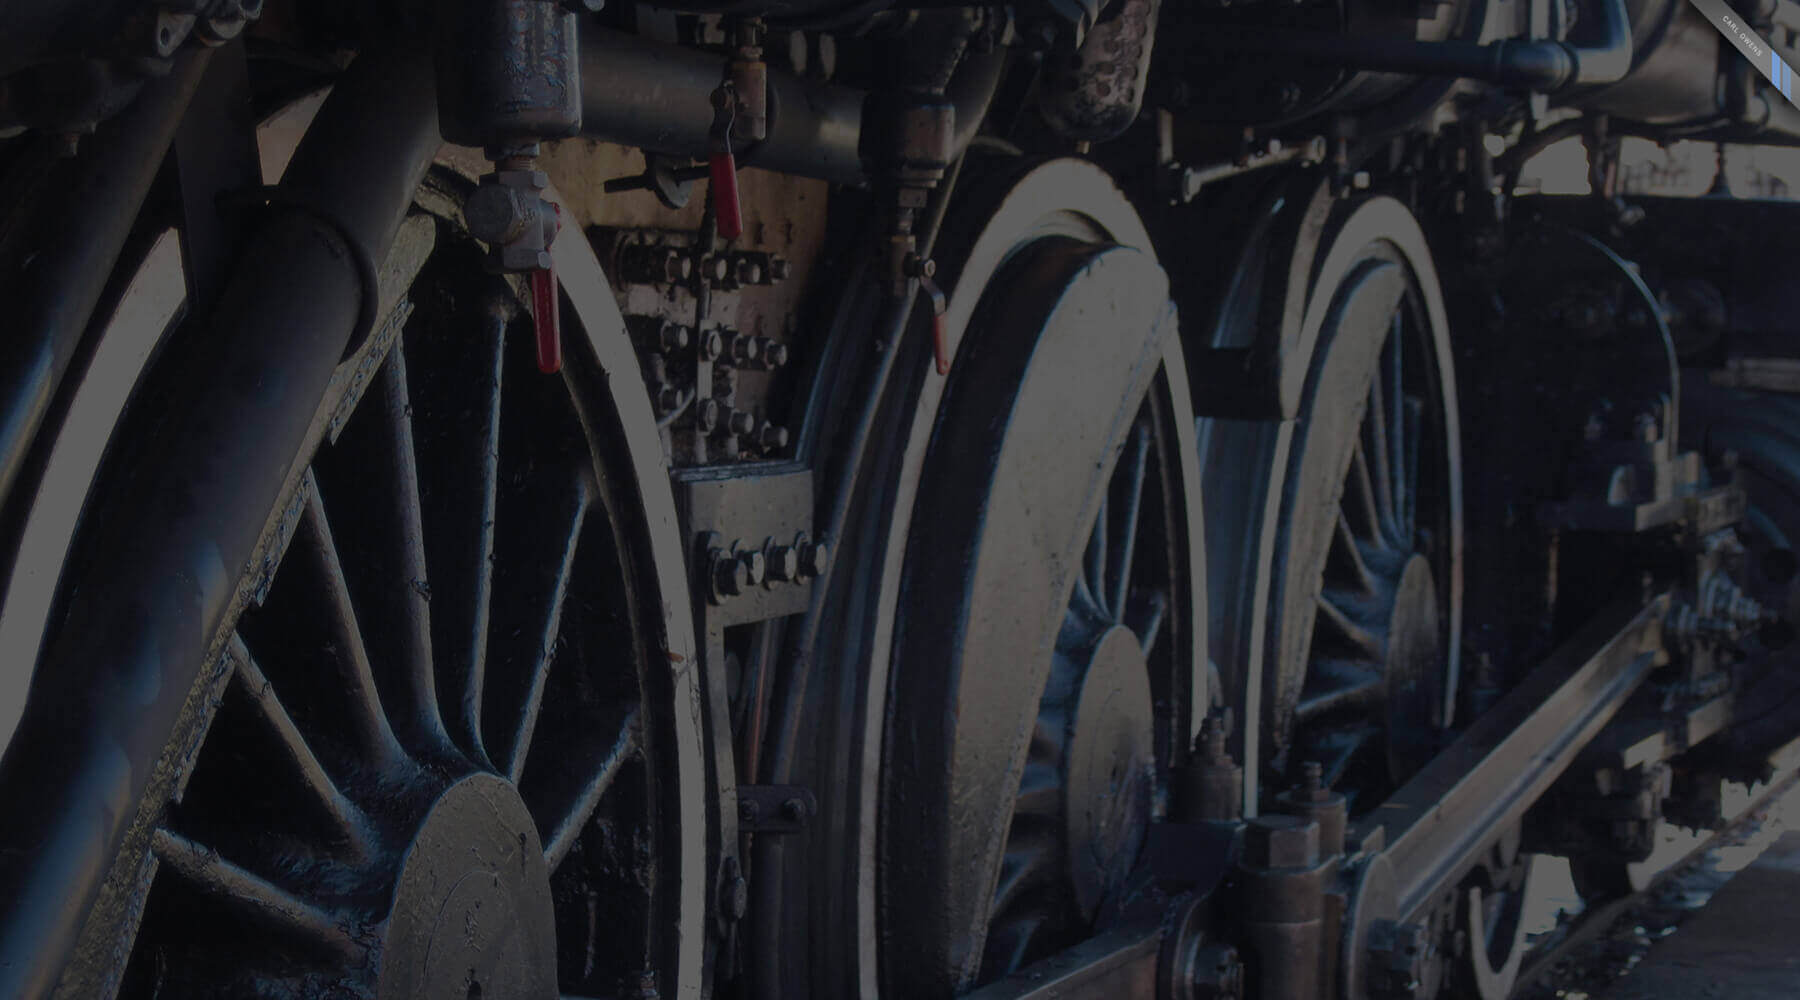 photo of large driver wheels on an old American steam engine